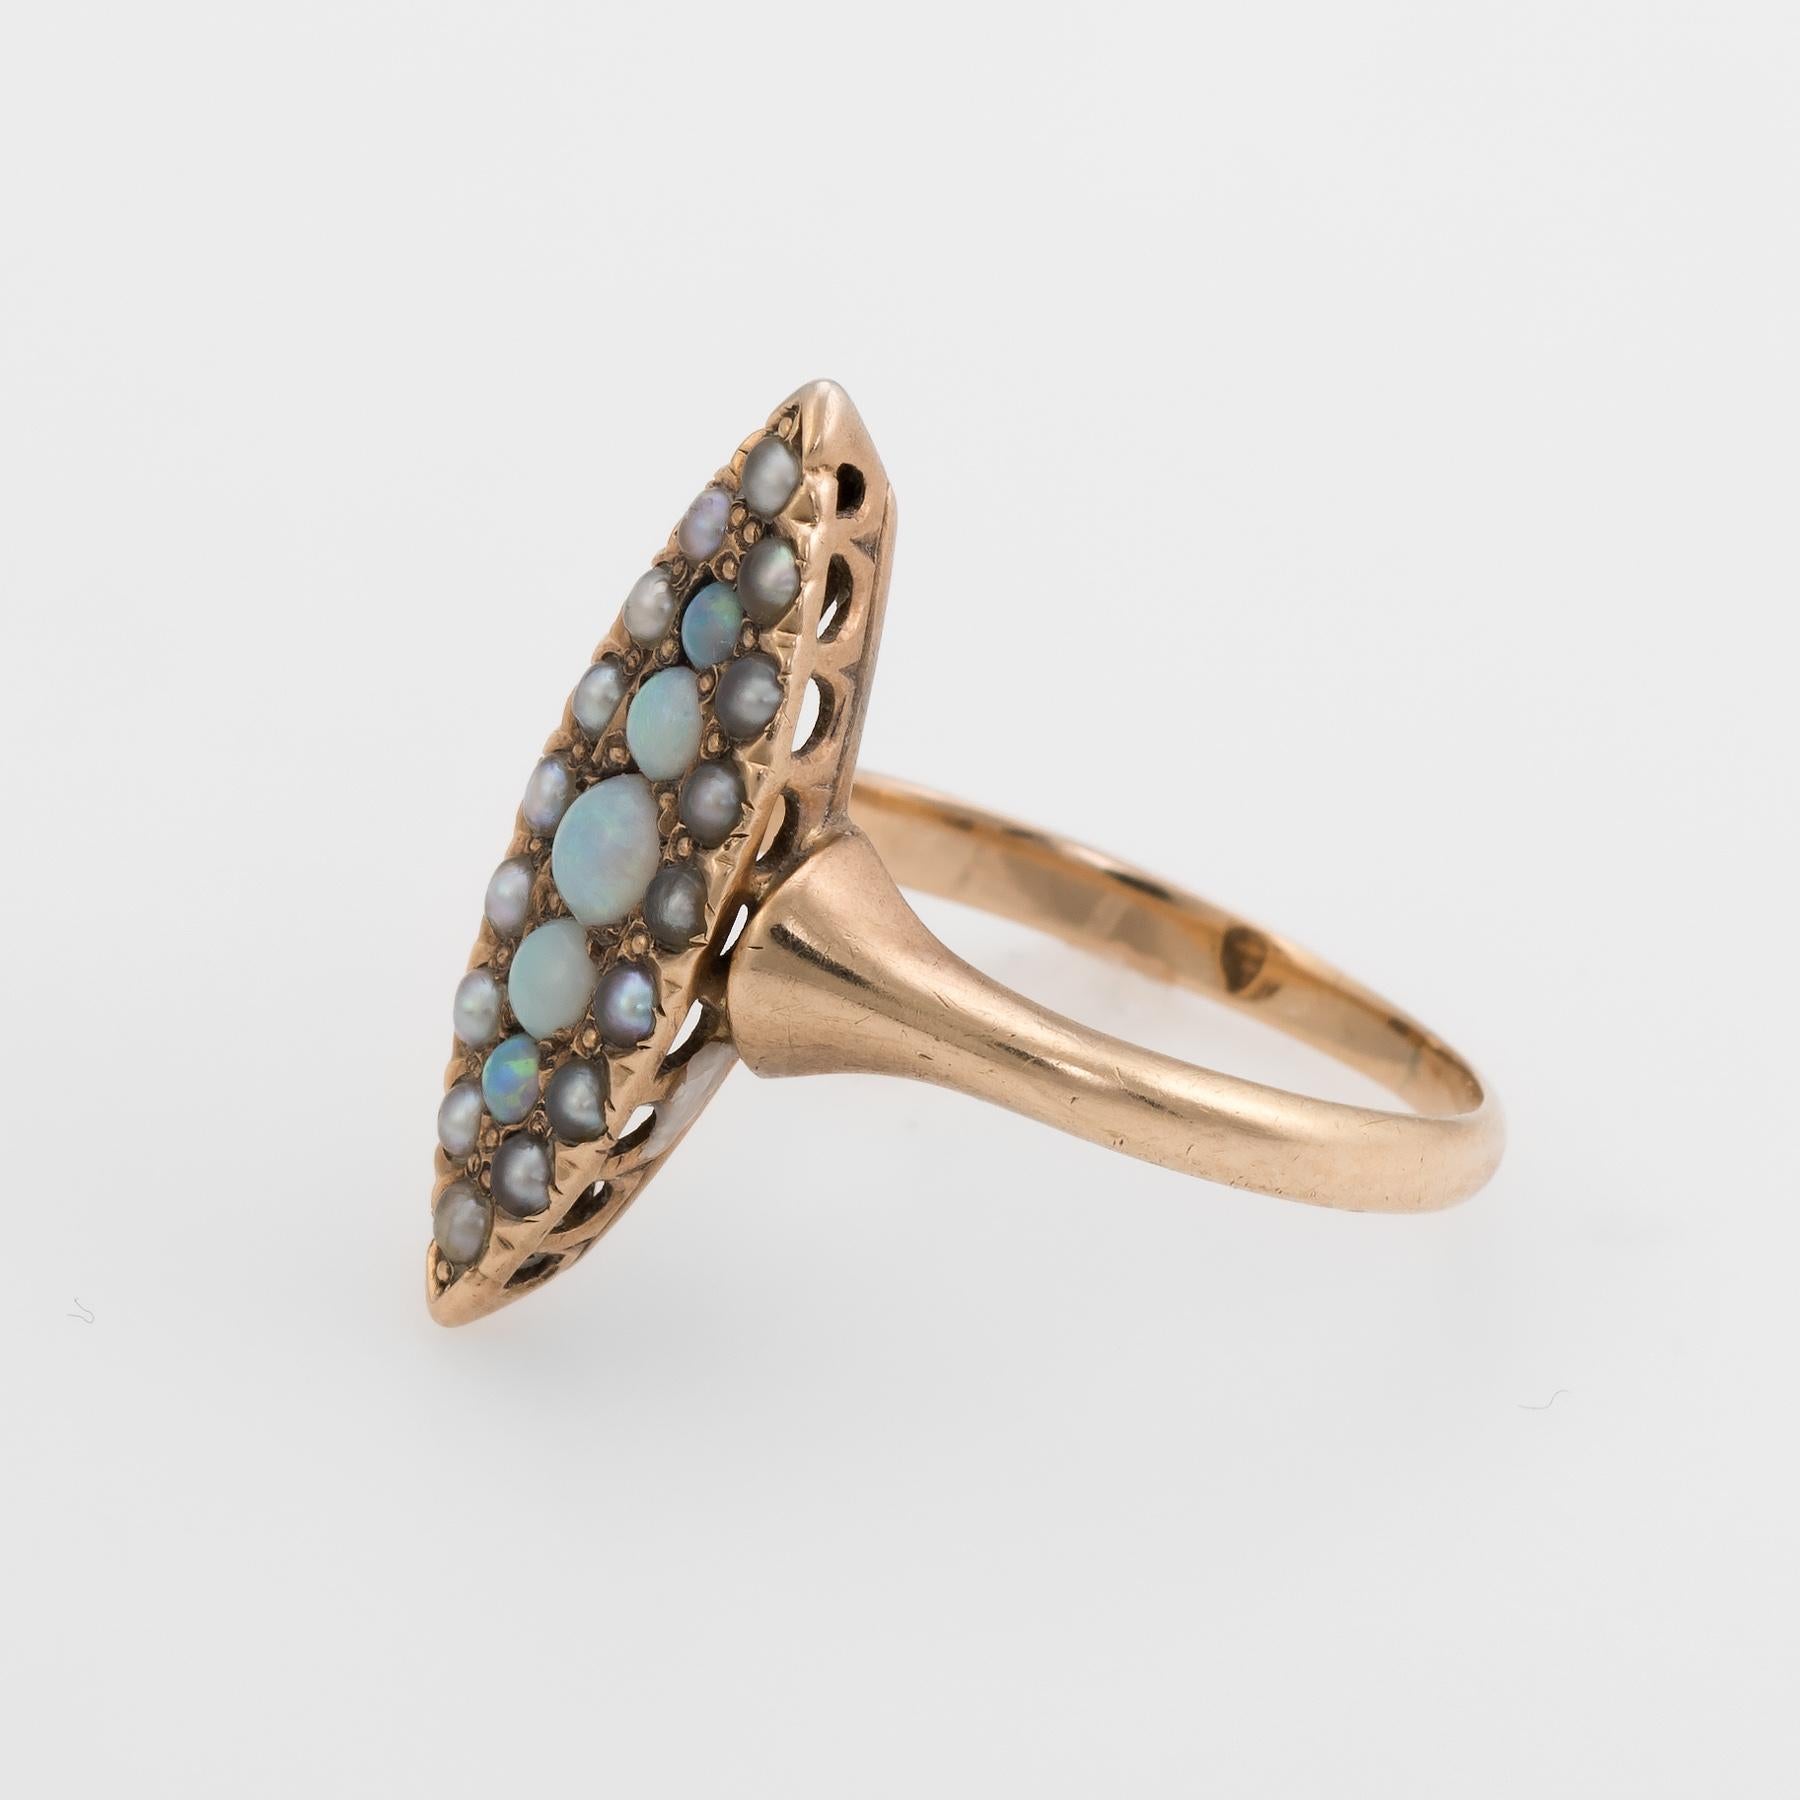 Victorian era navette ring (circa 1880s to 1900s), crafted in 14 karat yellow gold.

Opals graduate in size from 1.5mm to 2.5mm. The seed pearls measure (average) 1.5mm. The opals are in excellent condition and free of cracks or chips.  

The ring